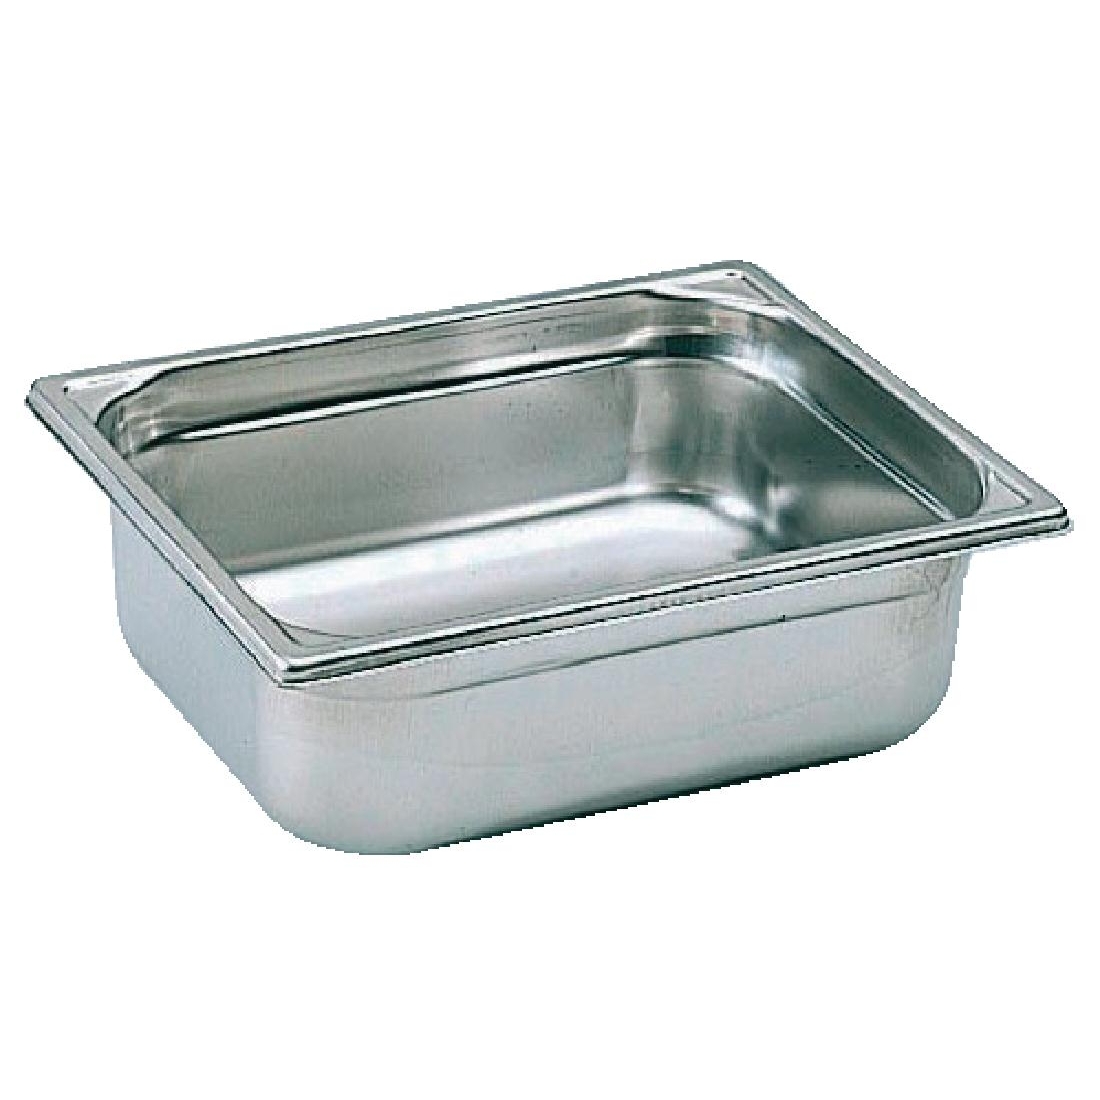 Bourgeat Stainless Steel 1/2 Gastronorm Pan 100mm